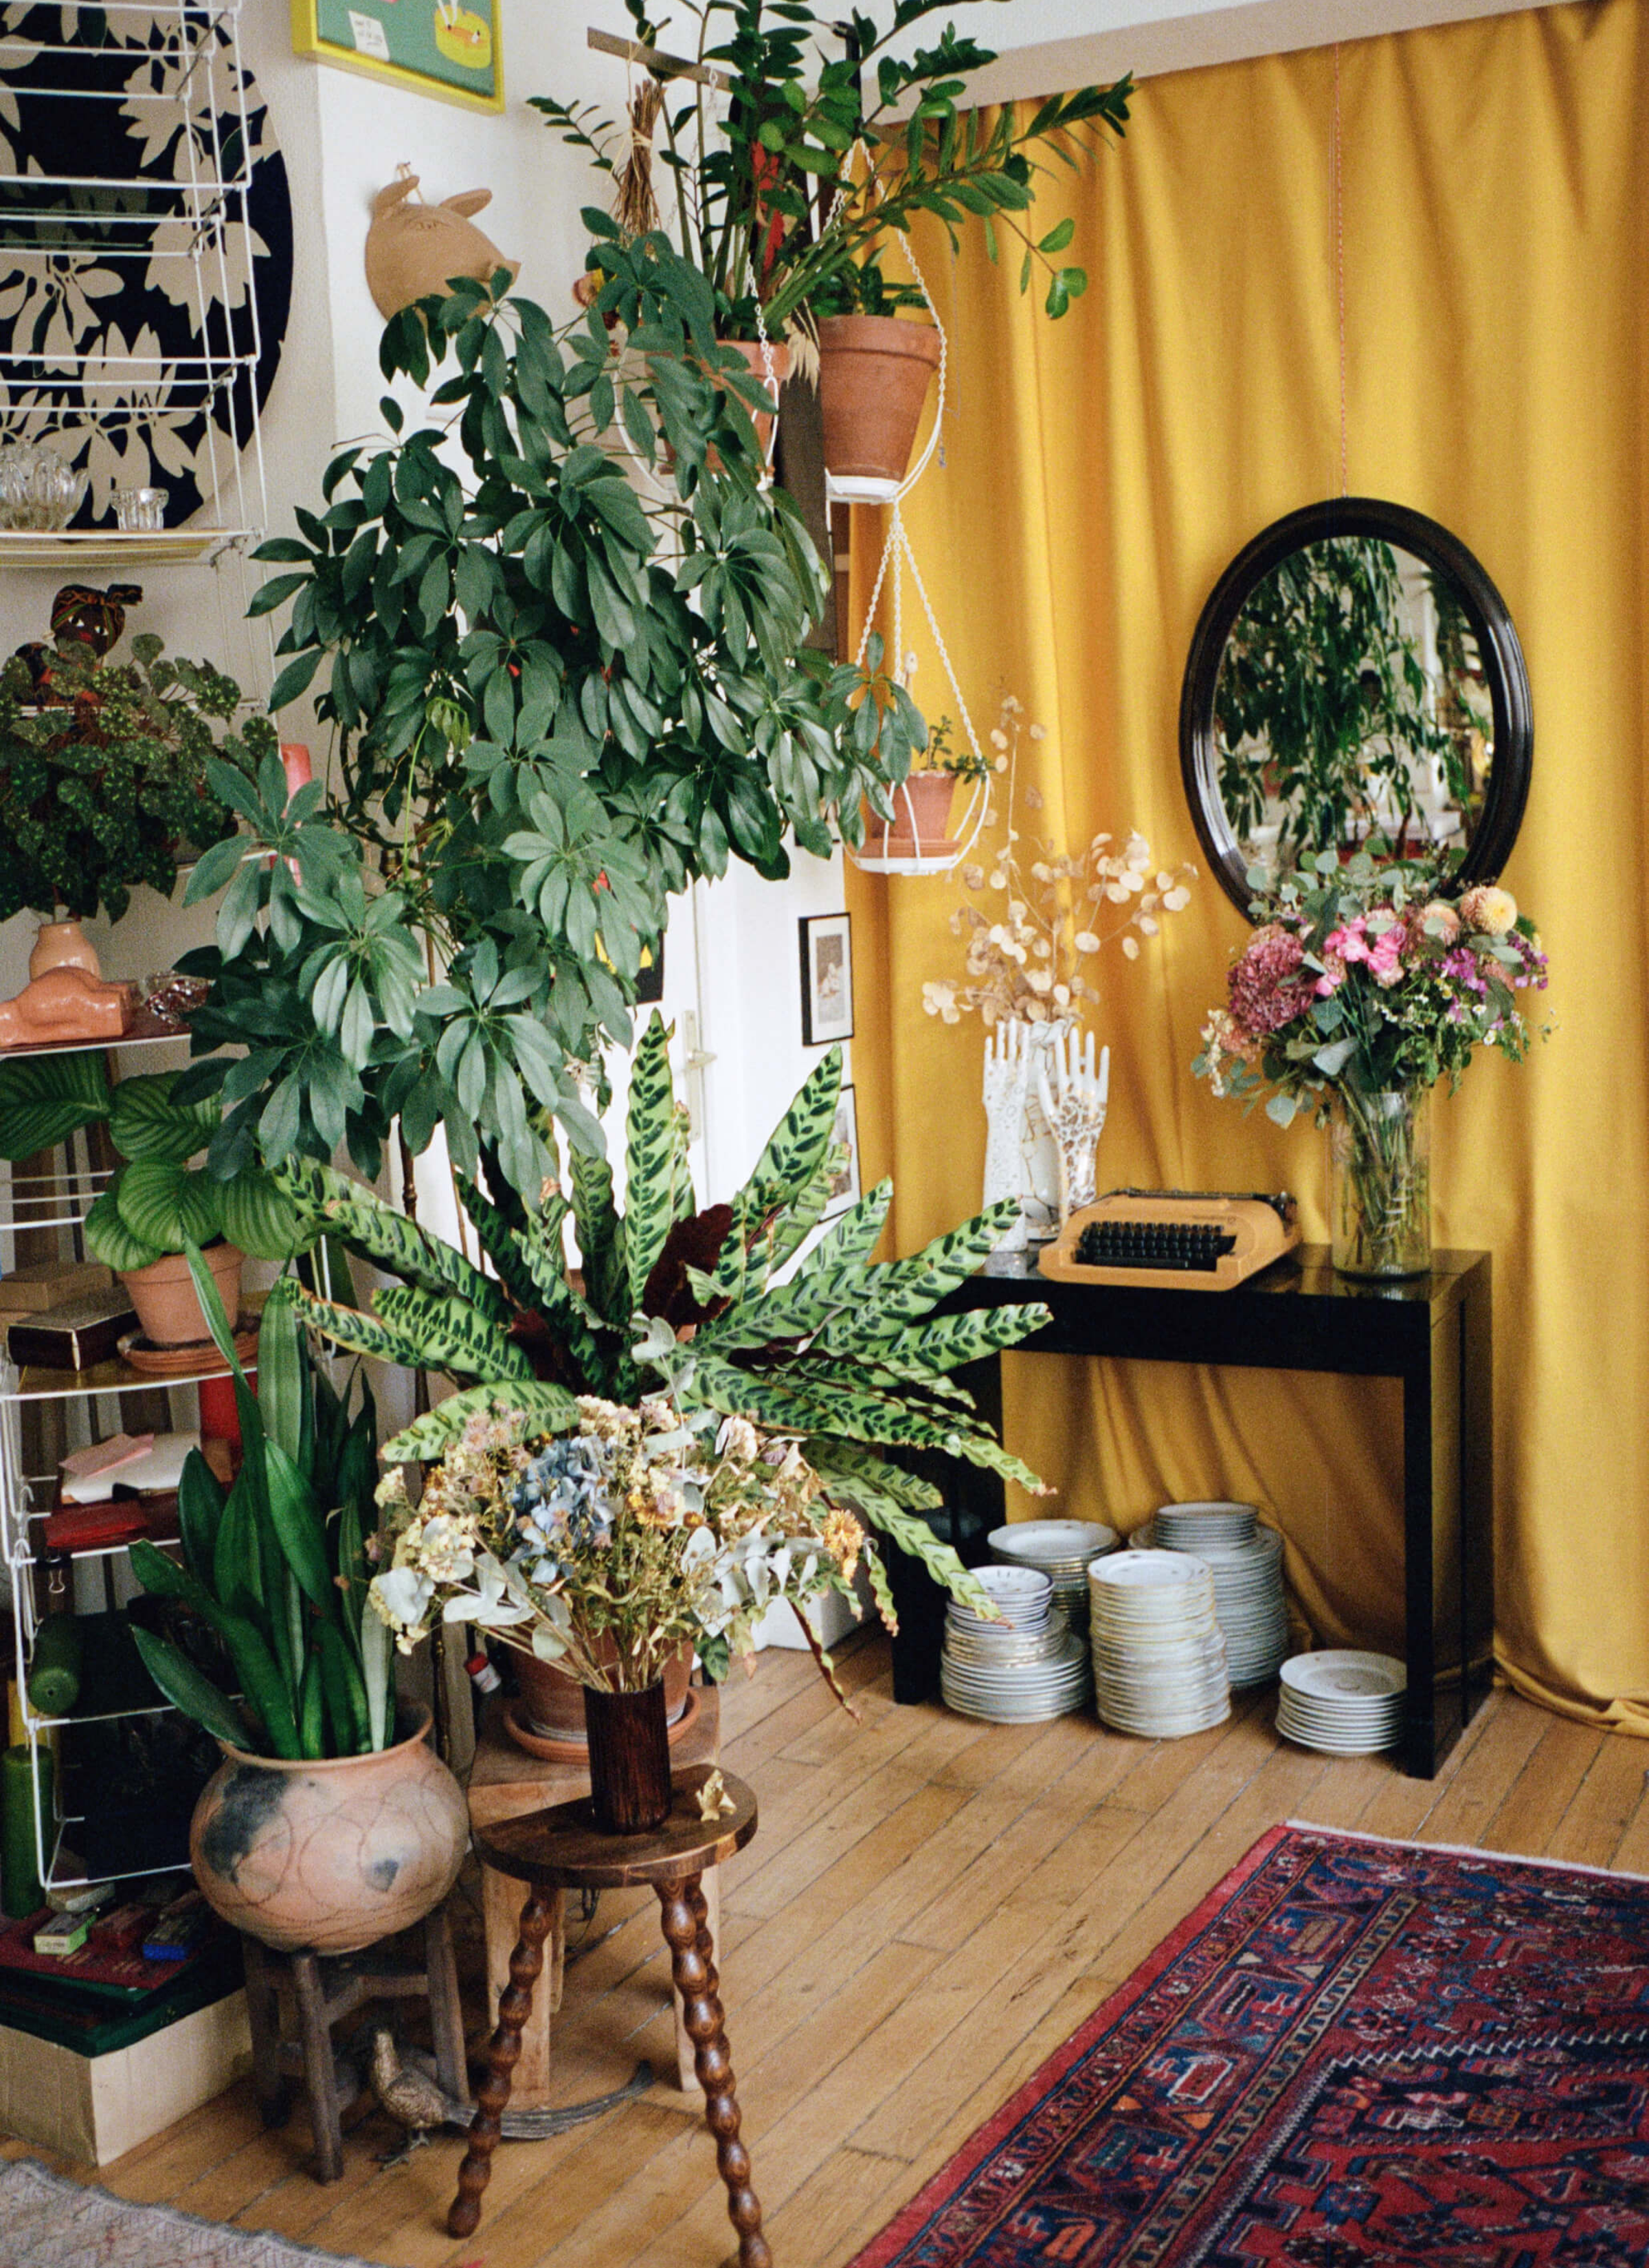 Loads of different kind of house plants in the room. Rattlesnake plant, Calathea, Umbrealla tree, Begonia, Snake plant and more. There a vase filled with a bundle of flowers on the desk next to a round mirror hung on the wall with yellow curtains.